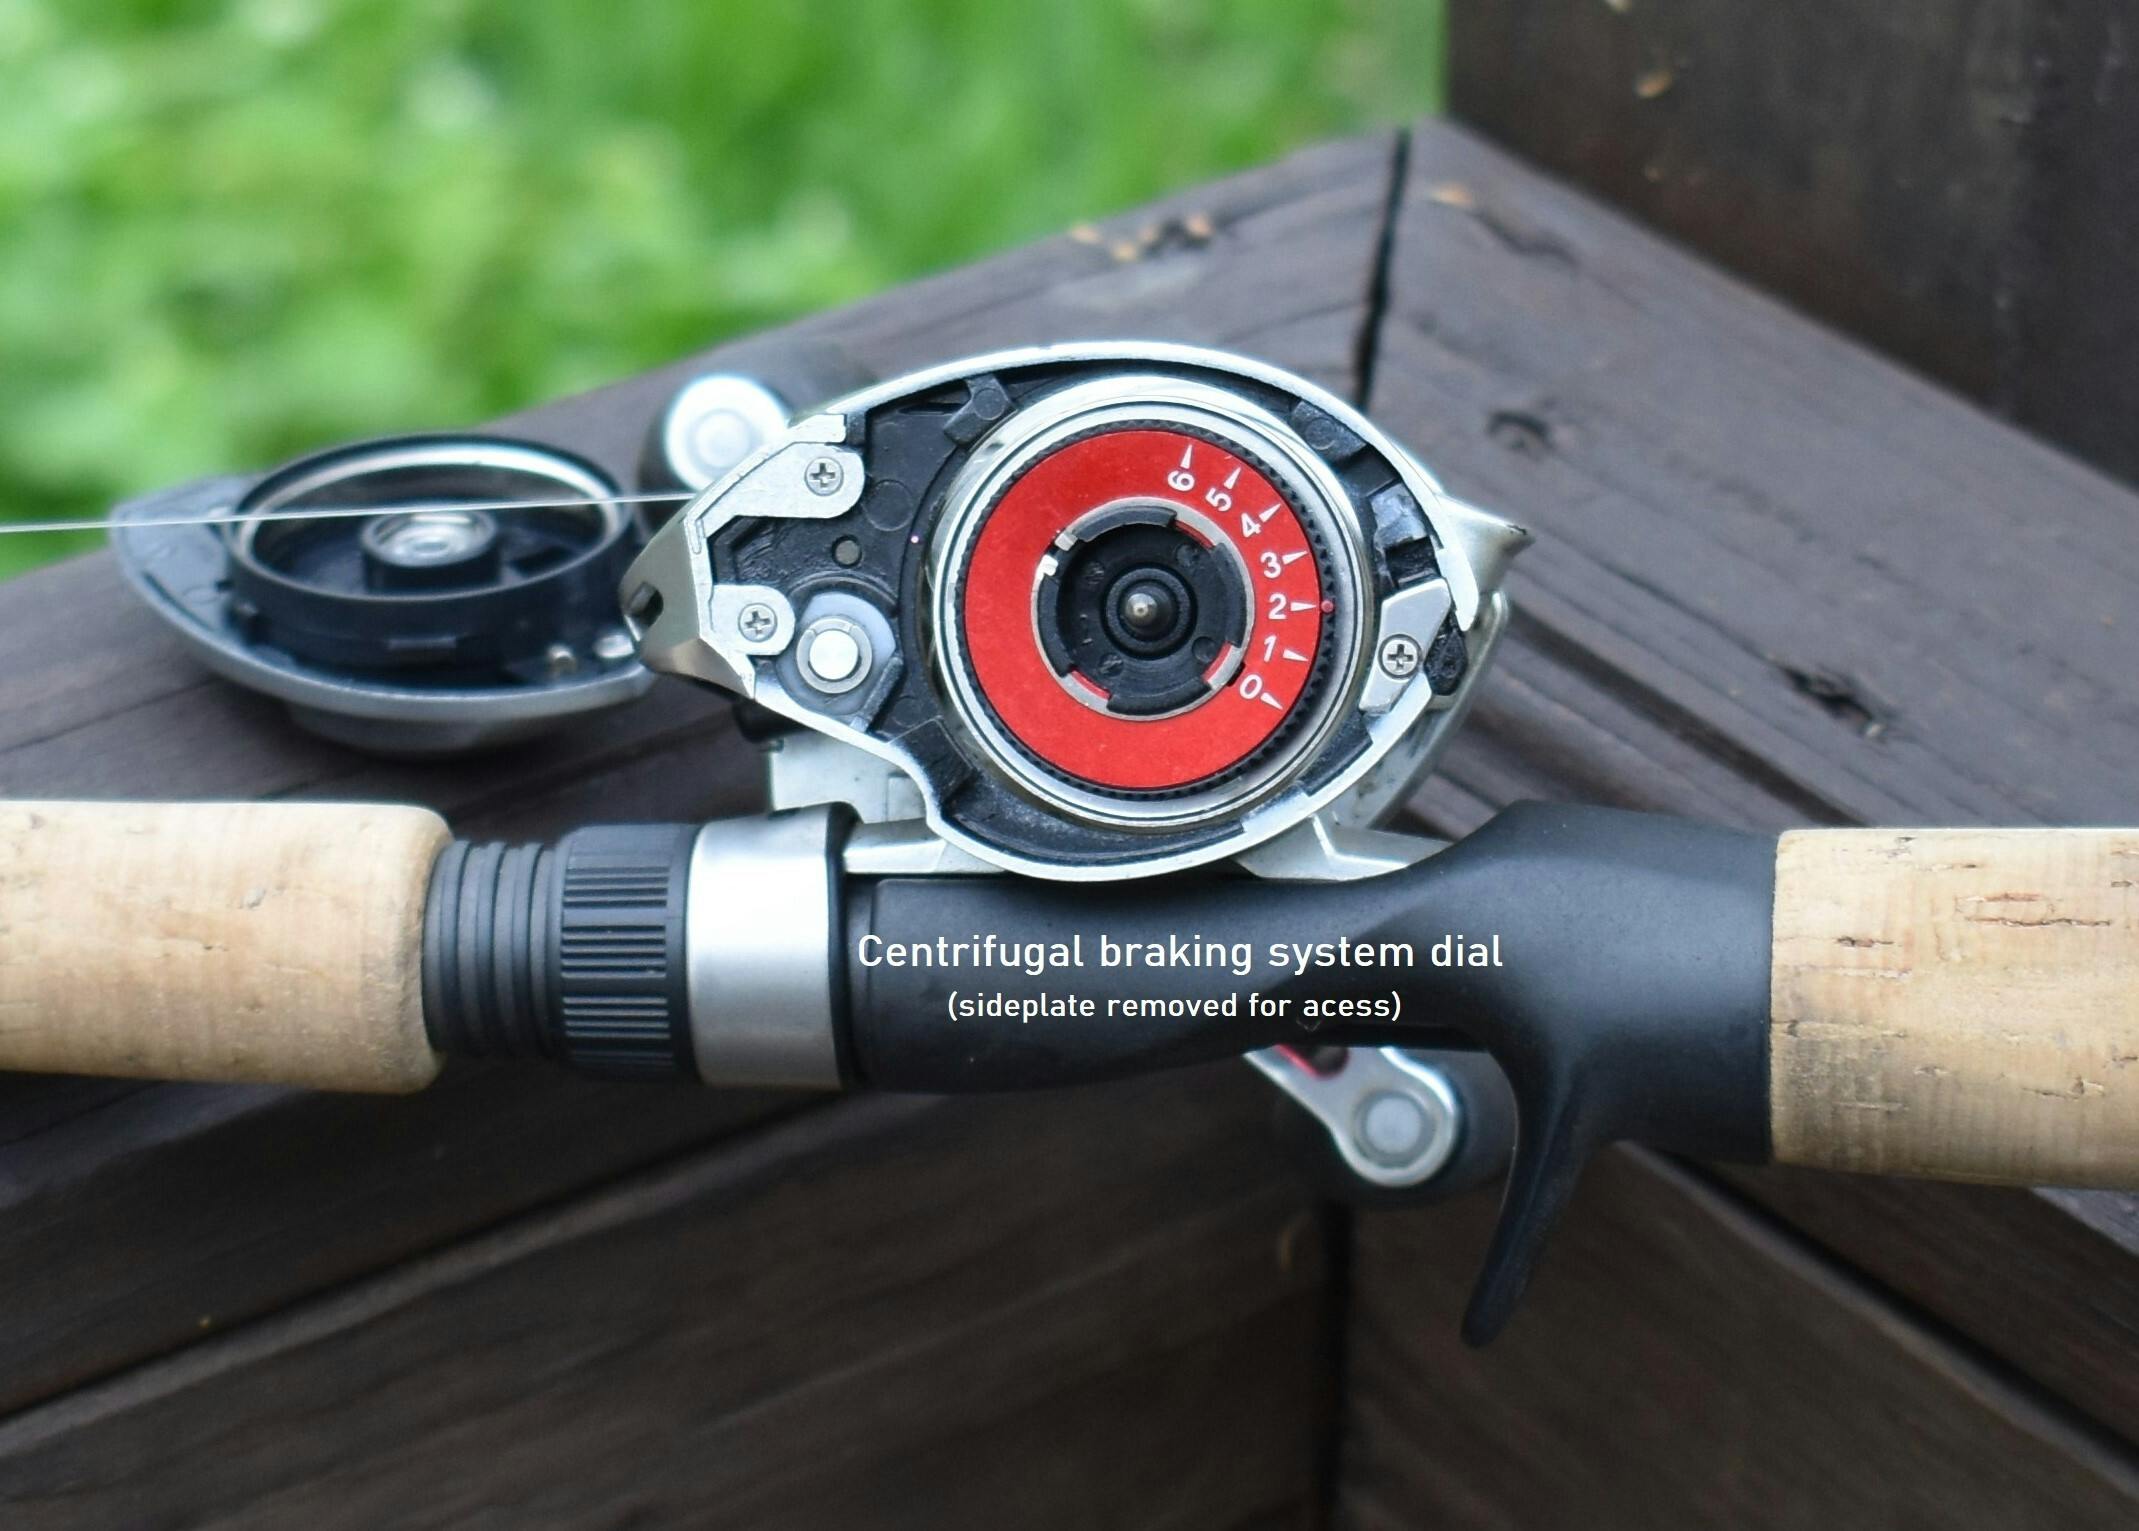 How to Spool a Baitcaster or Spinning Reel for Zero Fishing Line